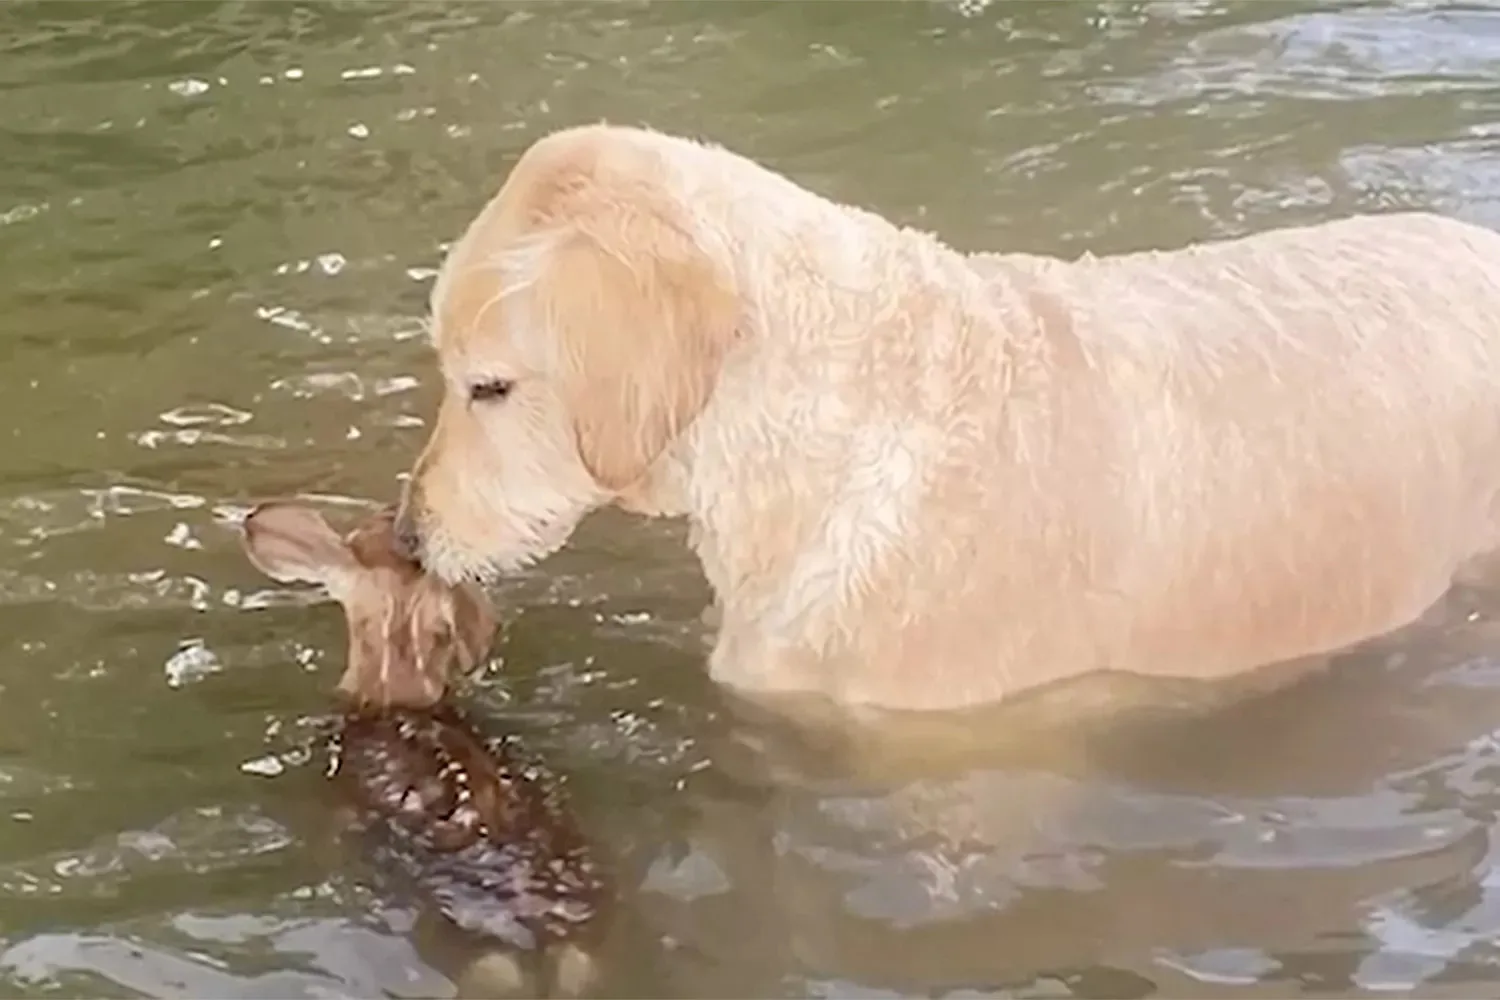 photo of dog harley and baby fawn in water